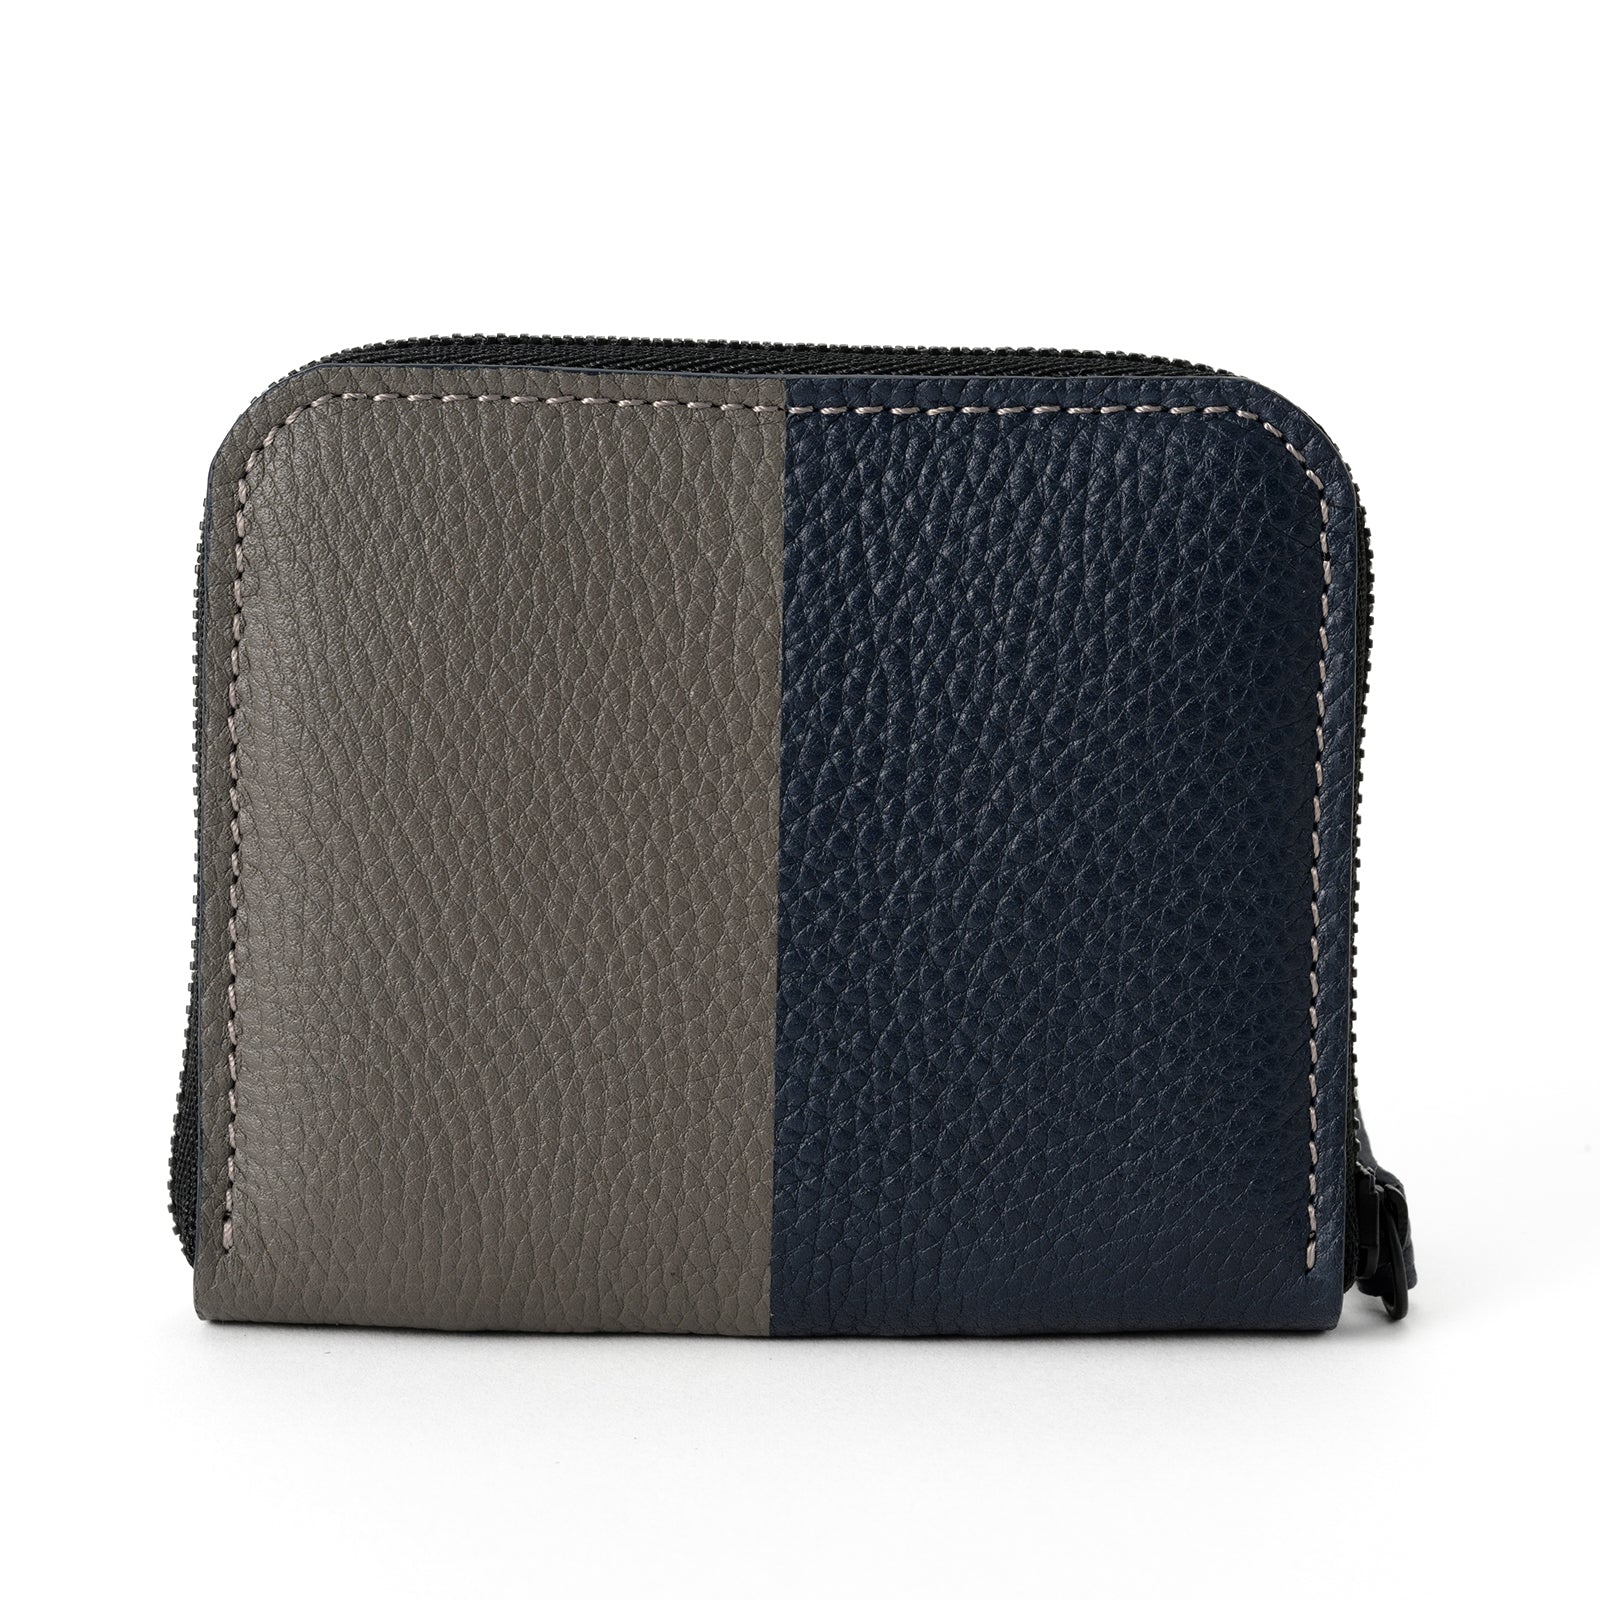 Bicolor round zipper compact wallet Togo leather